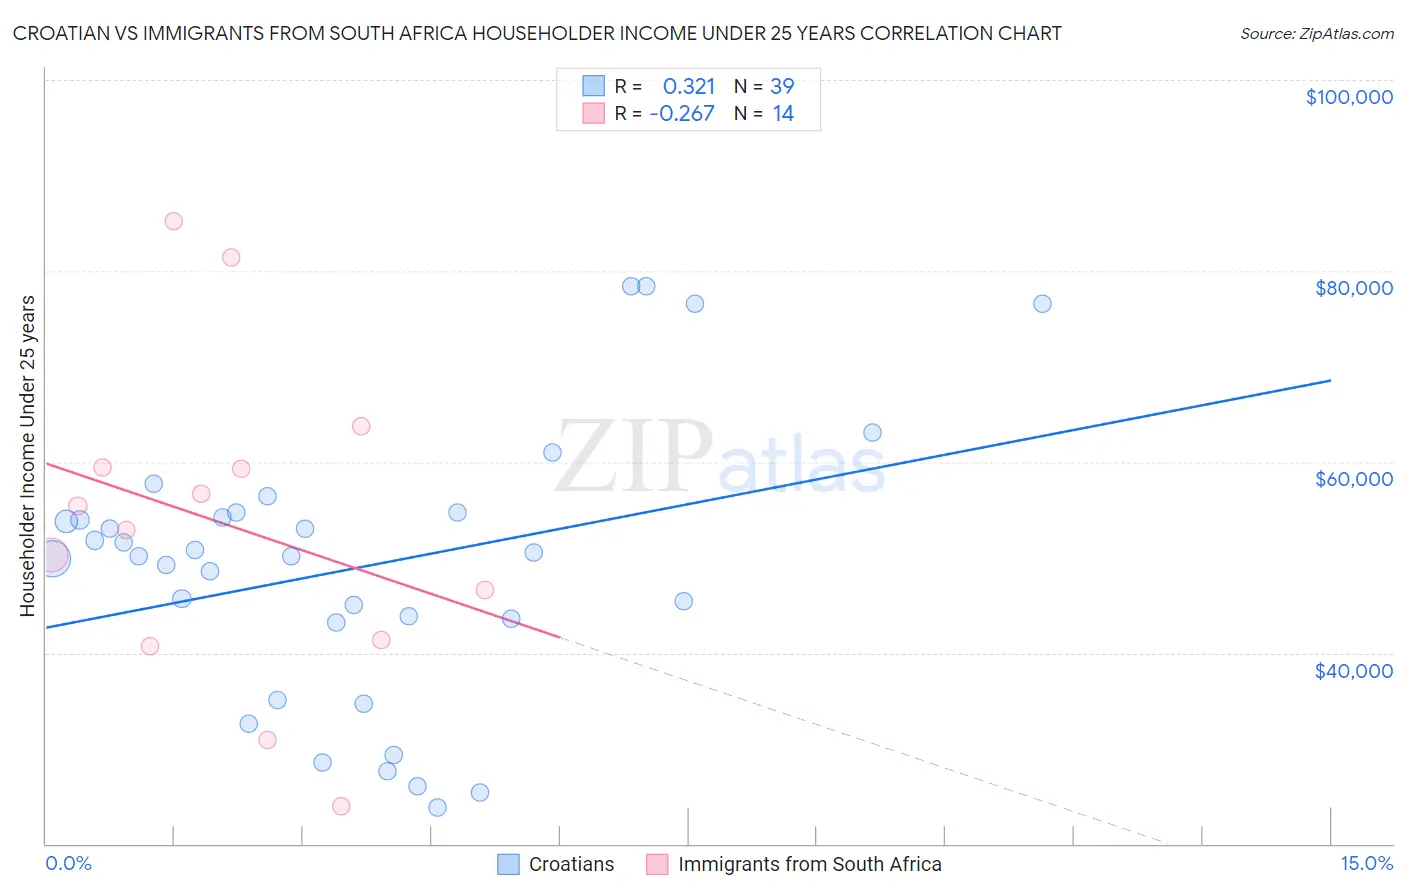 Croatian vs Immigrants from South Africa Householder Income Under 25 years